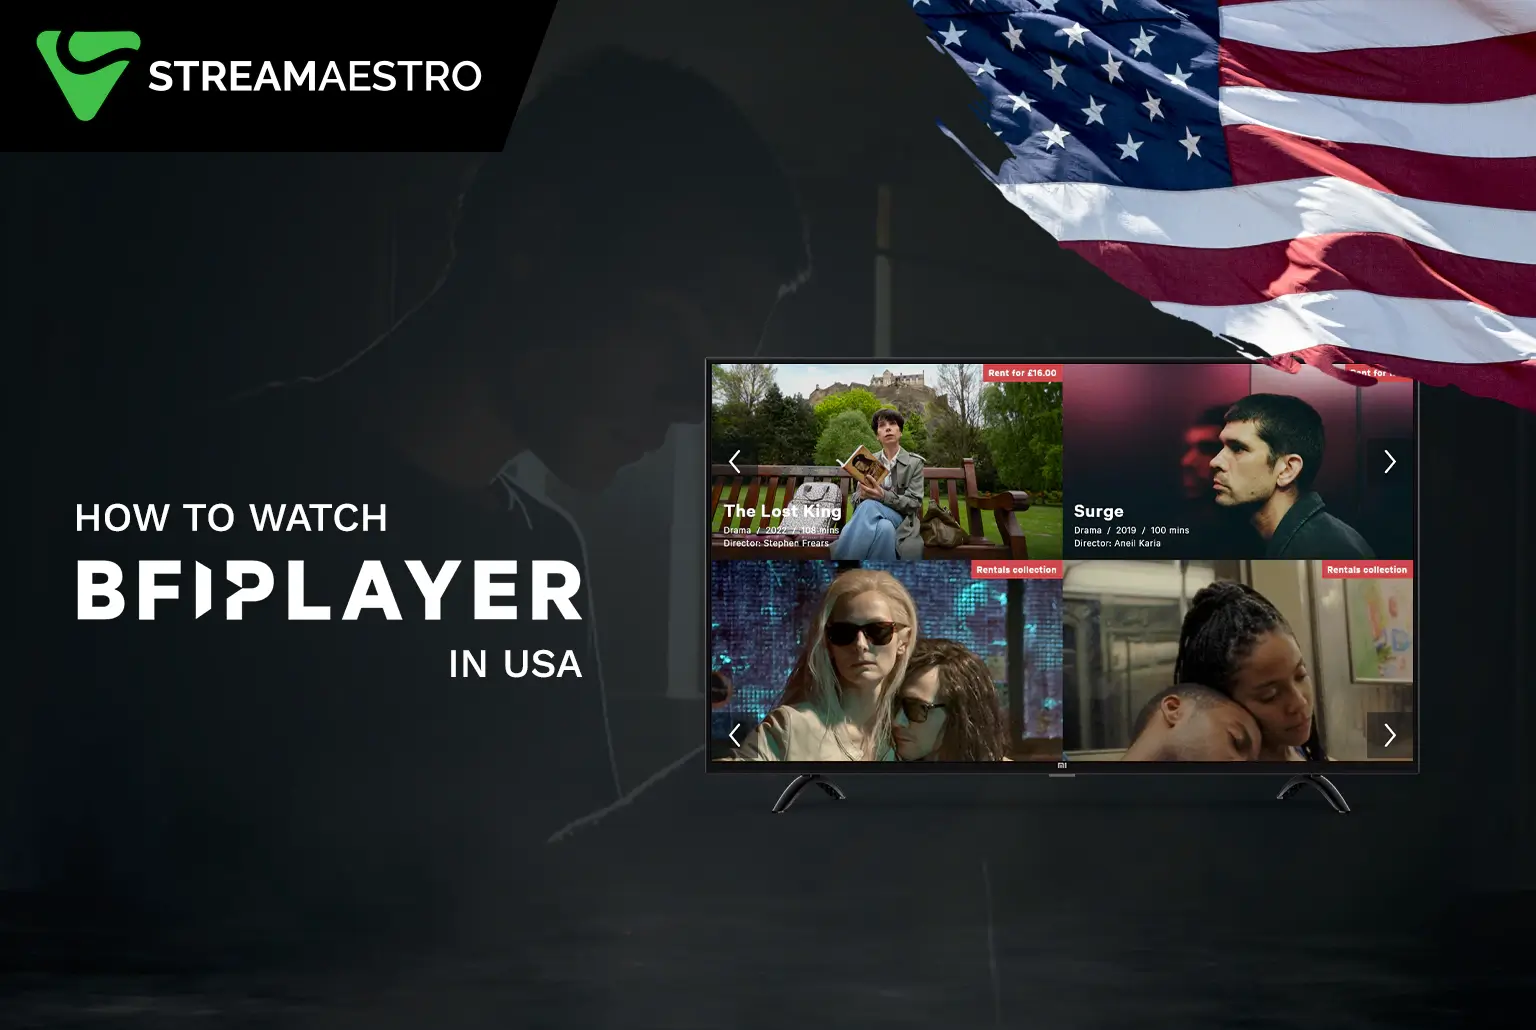 Watch BFI Player in USA